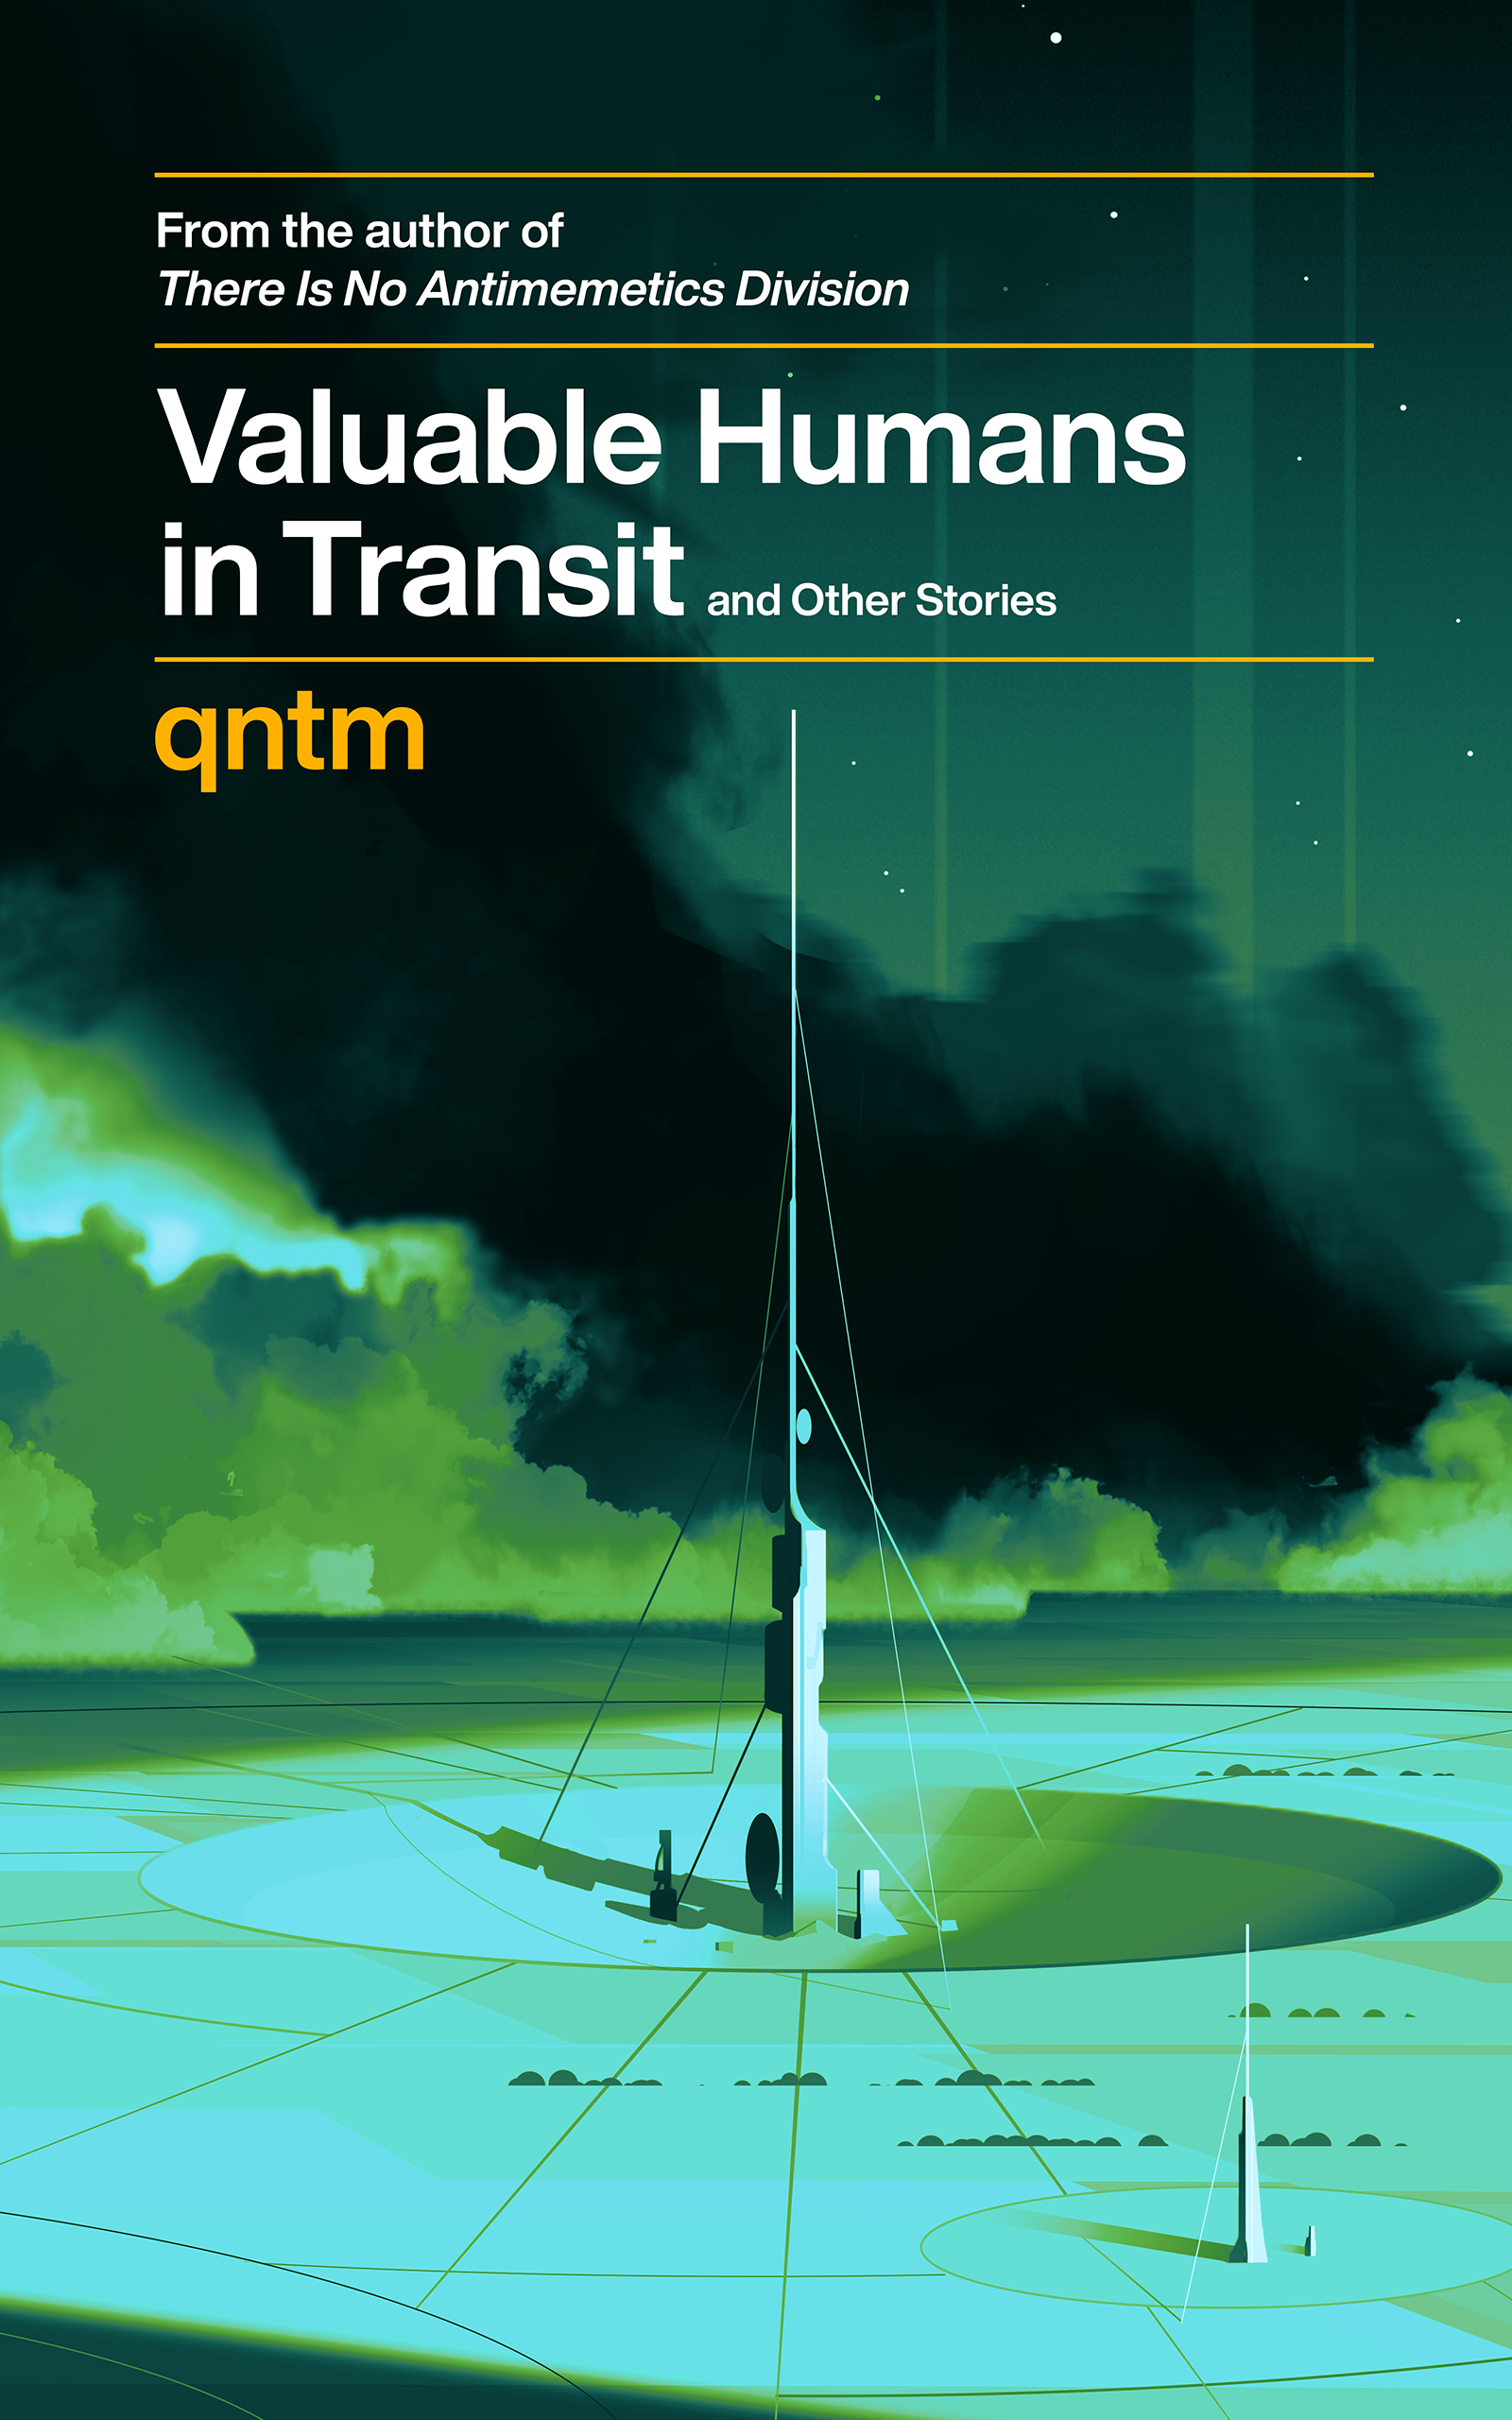 qntm: Valuable Humans in Transit (EBook)